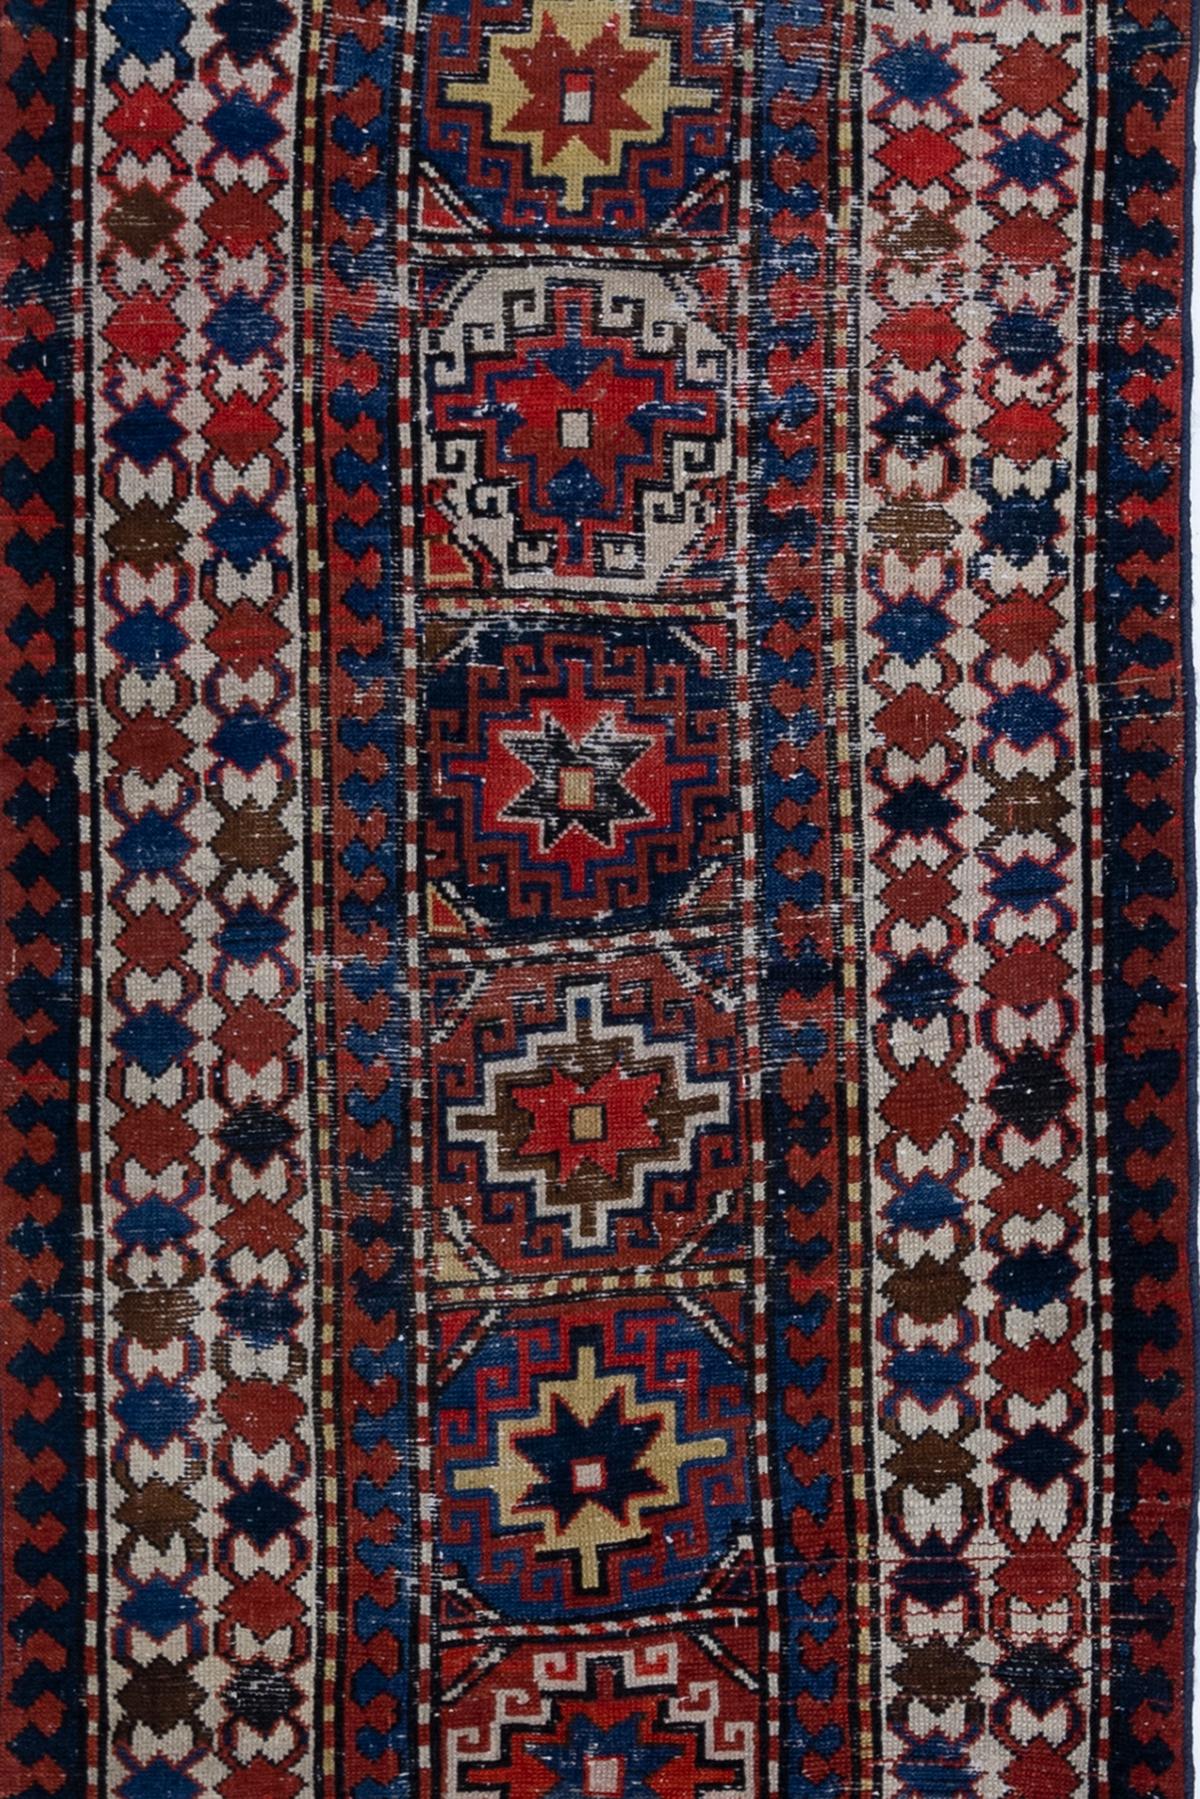 Age: Circa 1910

Colors: red, blue, ivory, gold

Pile: medium

Wear Notes: 5

Material: wool on wool

Antique textile woven in the Caucasus in the earl part of the 20th century. Original colors with beautiful wear.

Vintage rugs are made